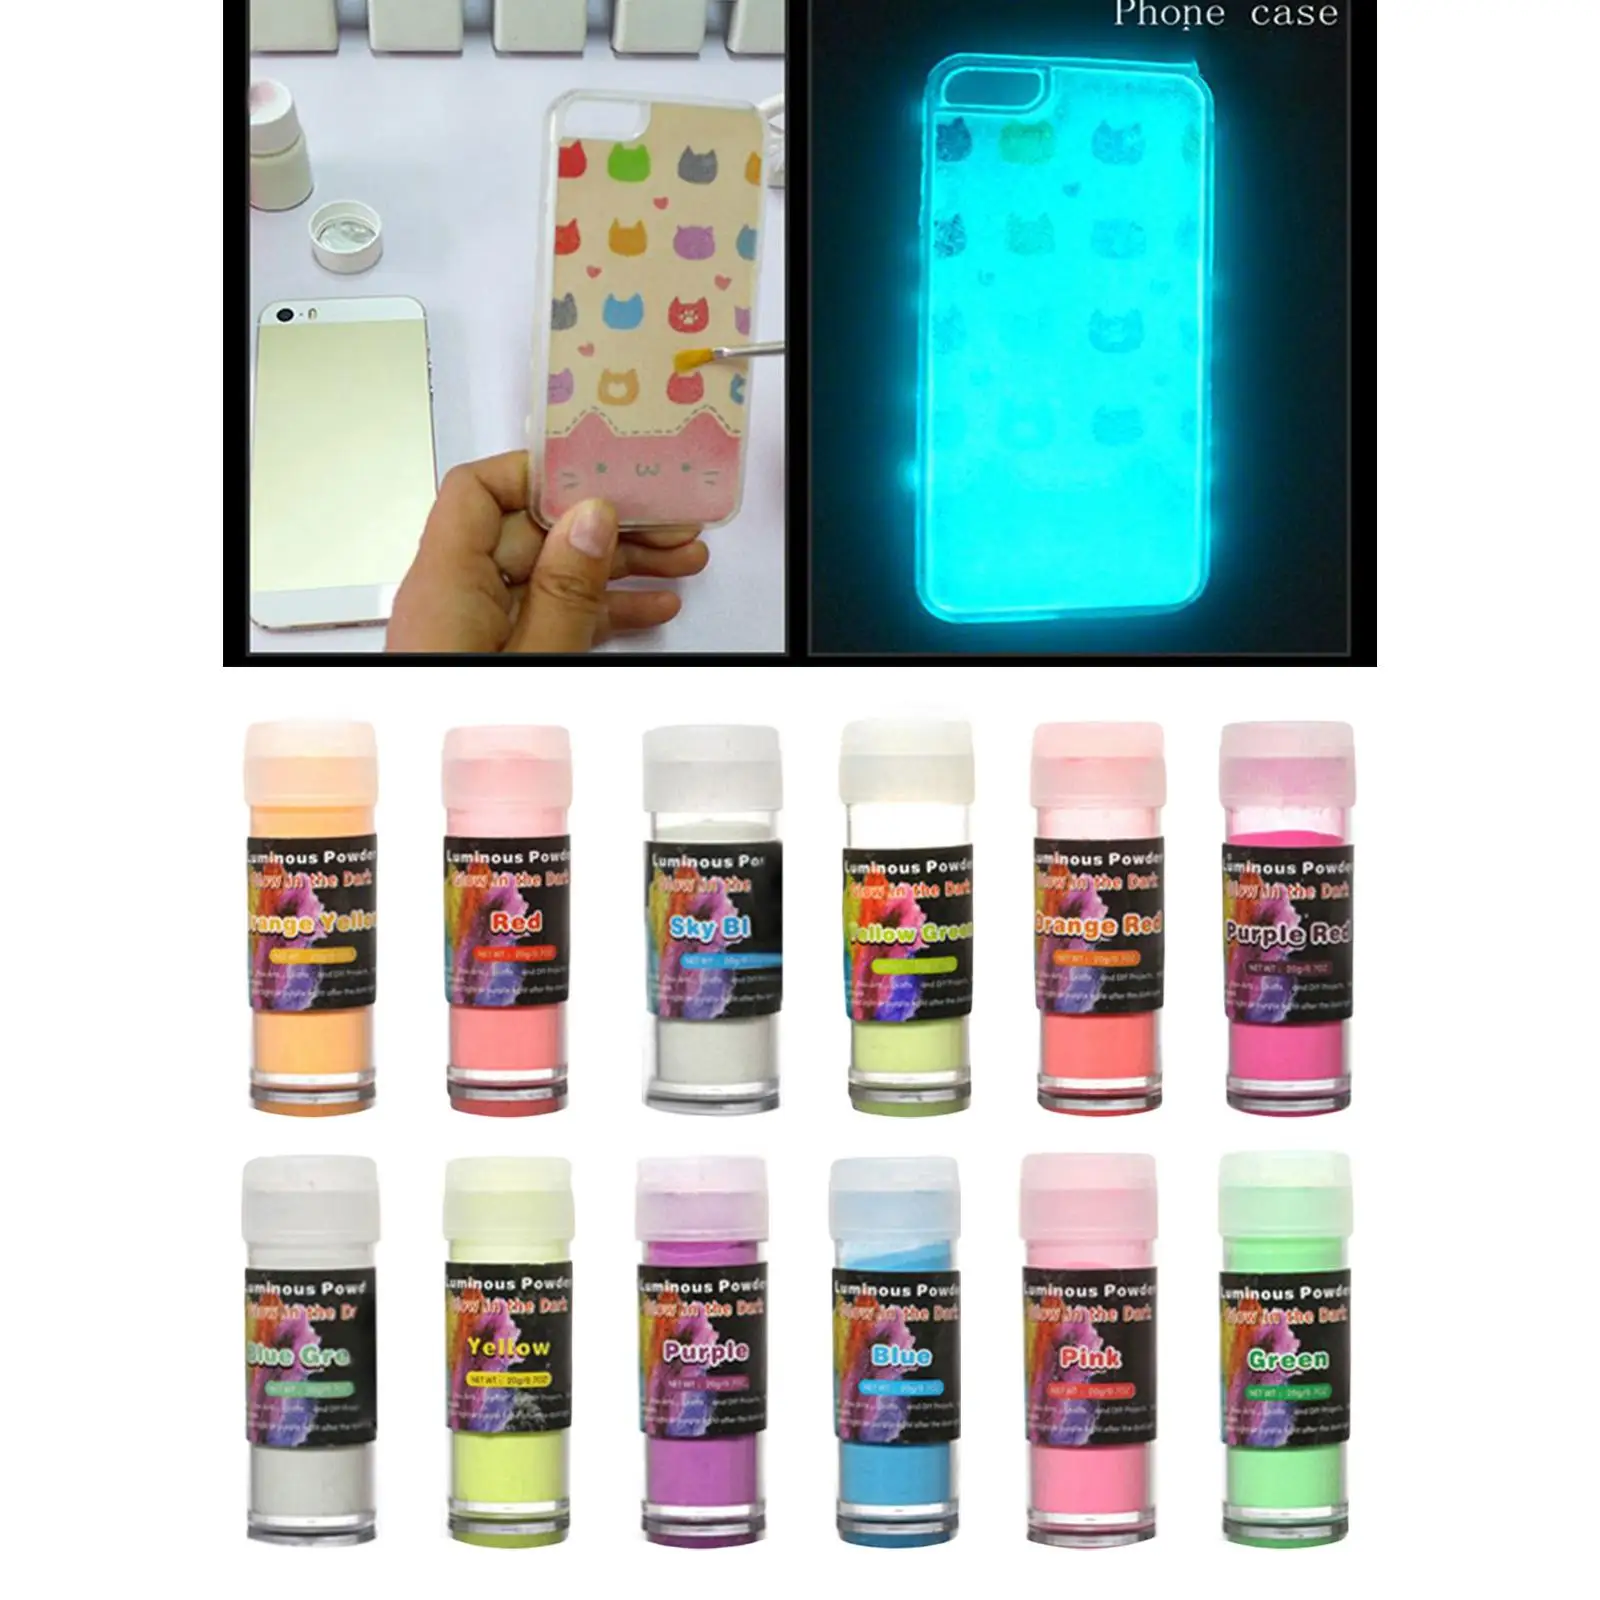 12x Luminous Powder Paint Making Materials Highlighter DIY Colorful Crafting Glow in The Dark Pigment Set for Graffiti Nails